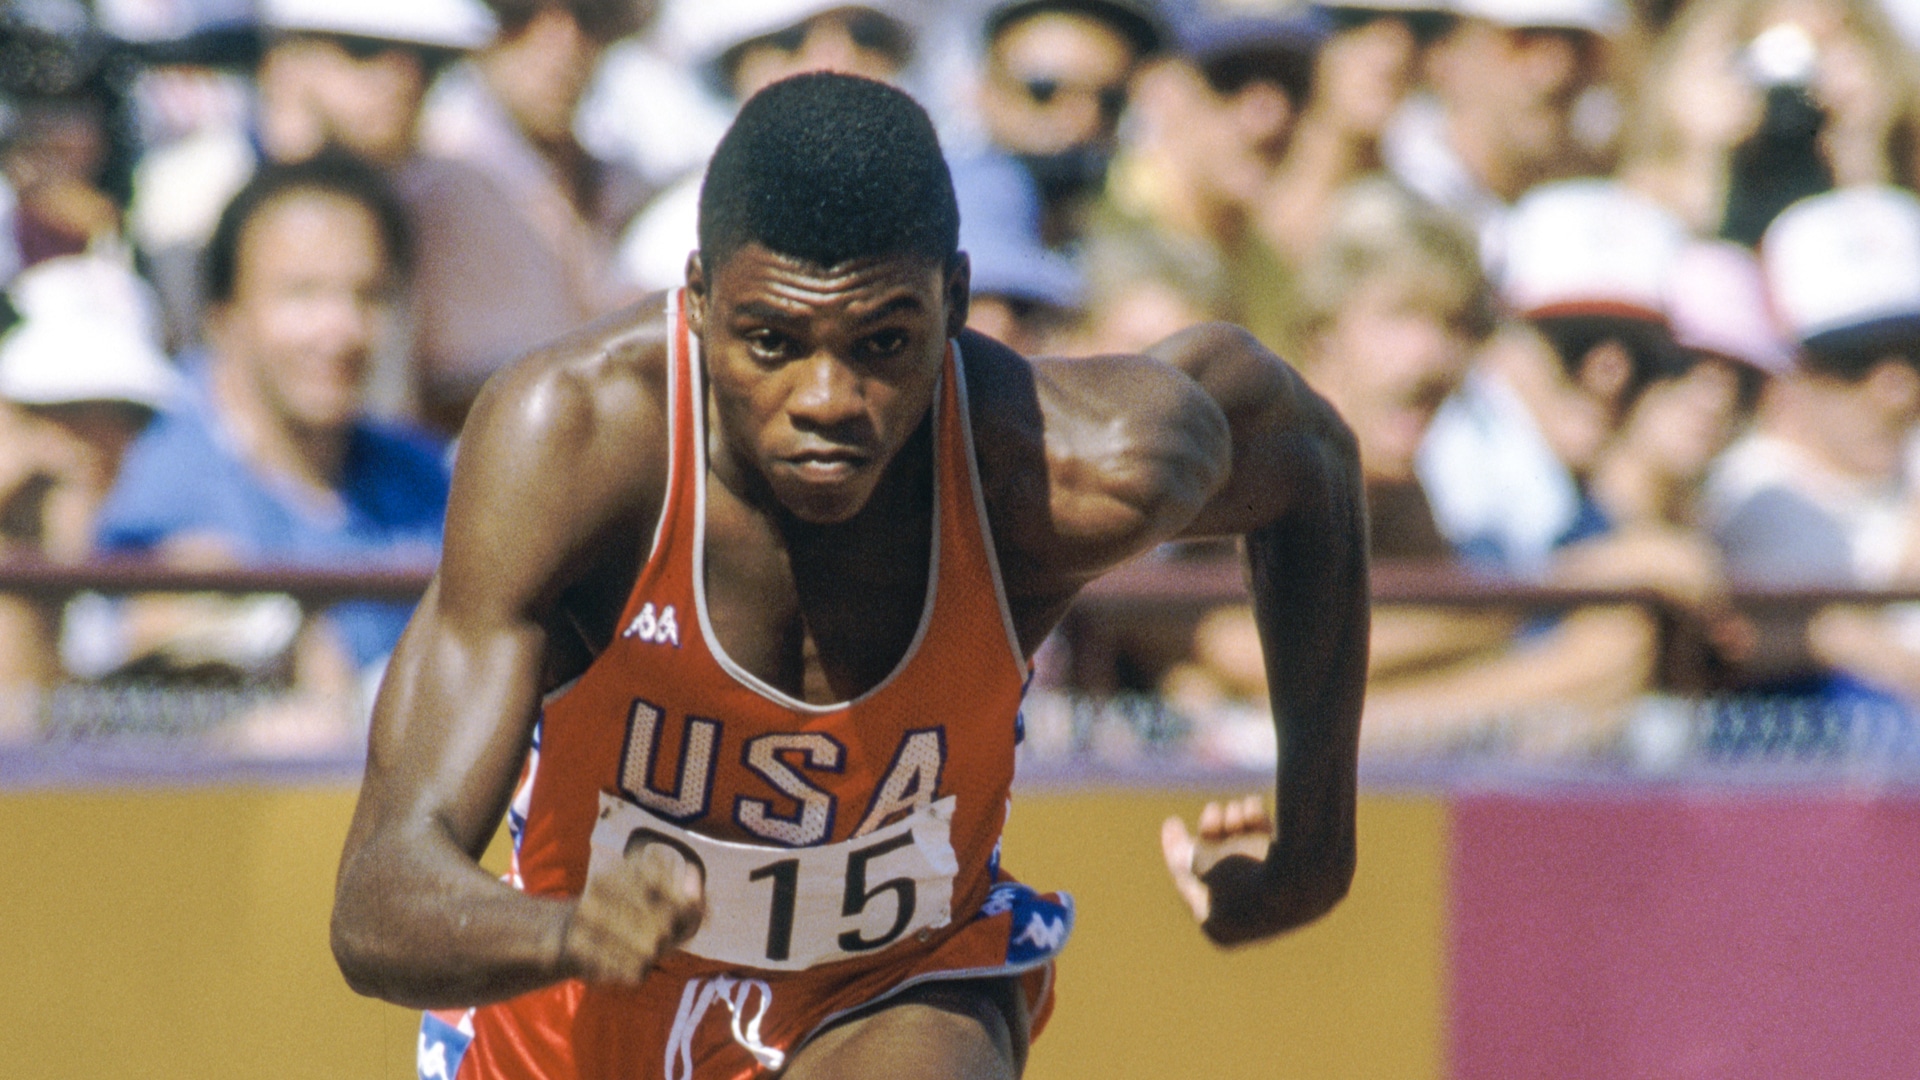 Carl Lewis | U.S. Olympic & Paralympic Hall of Fame